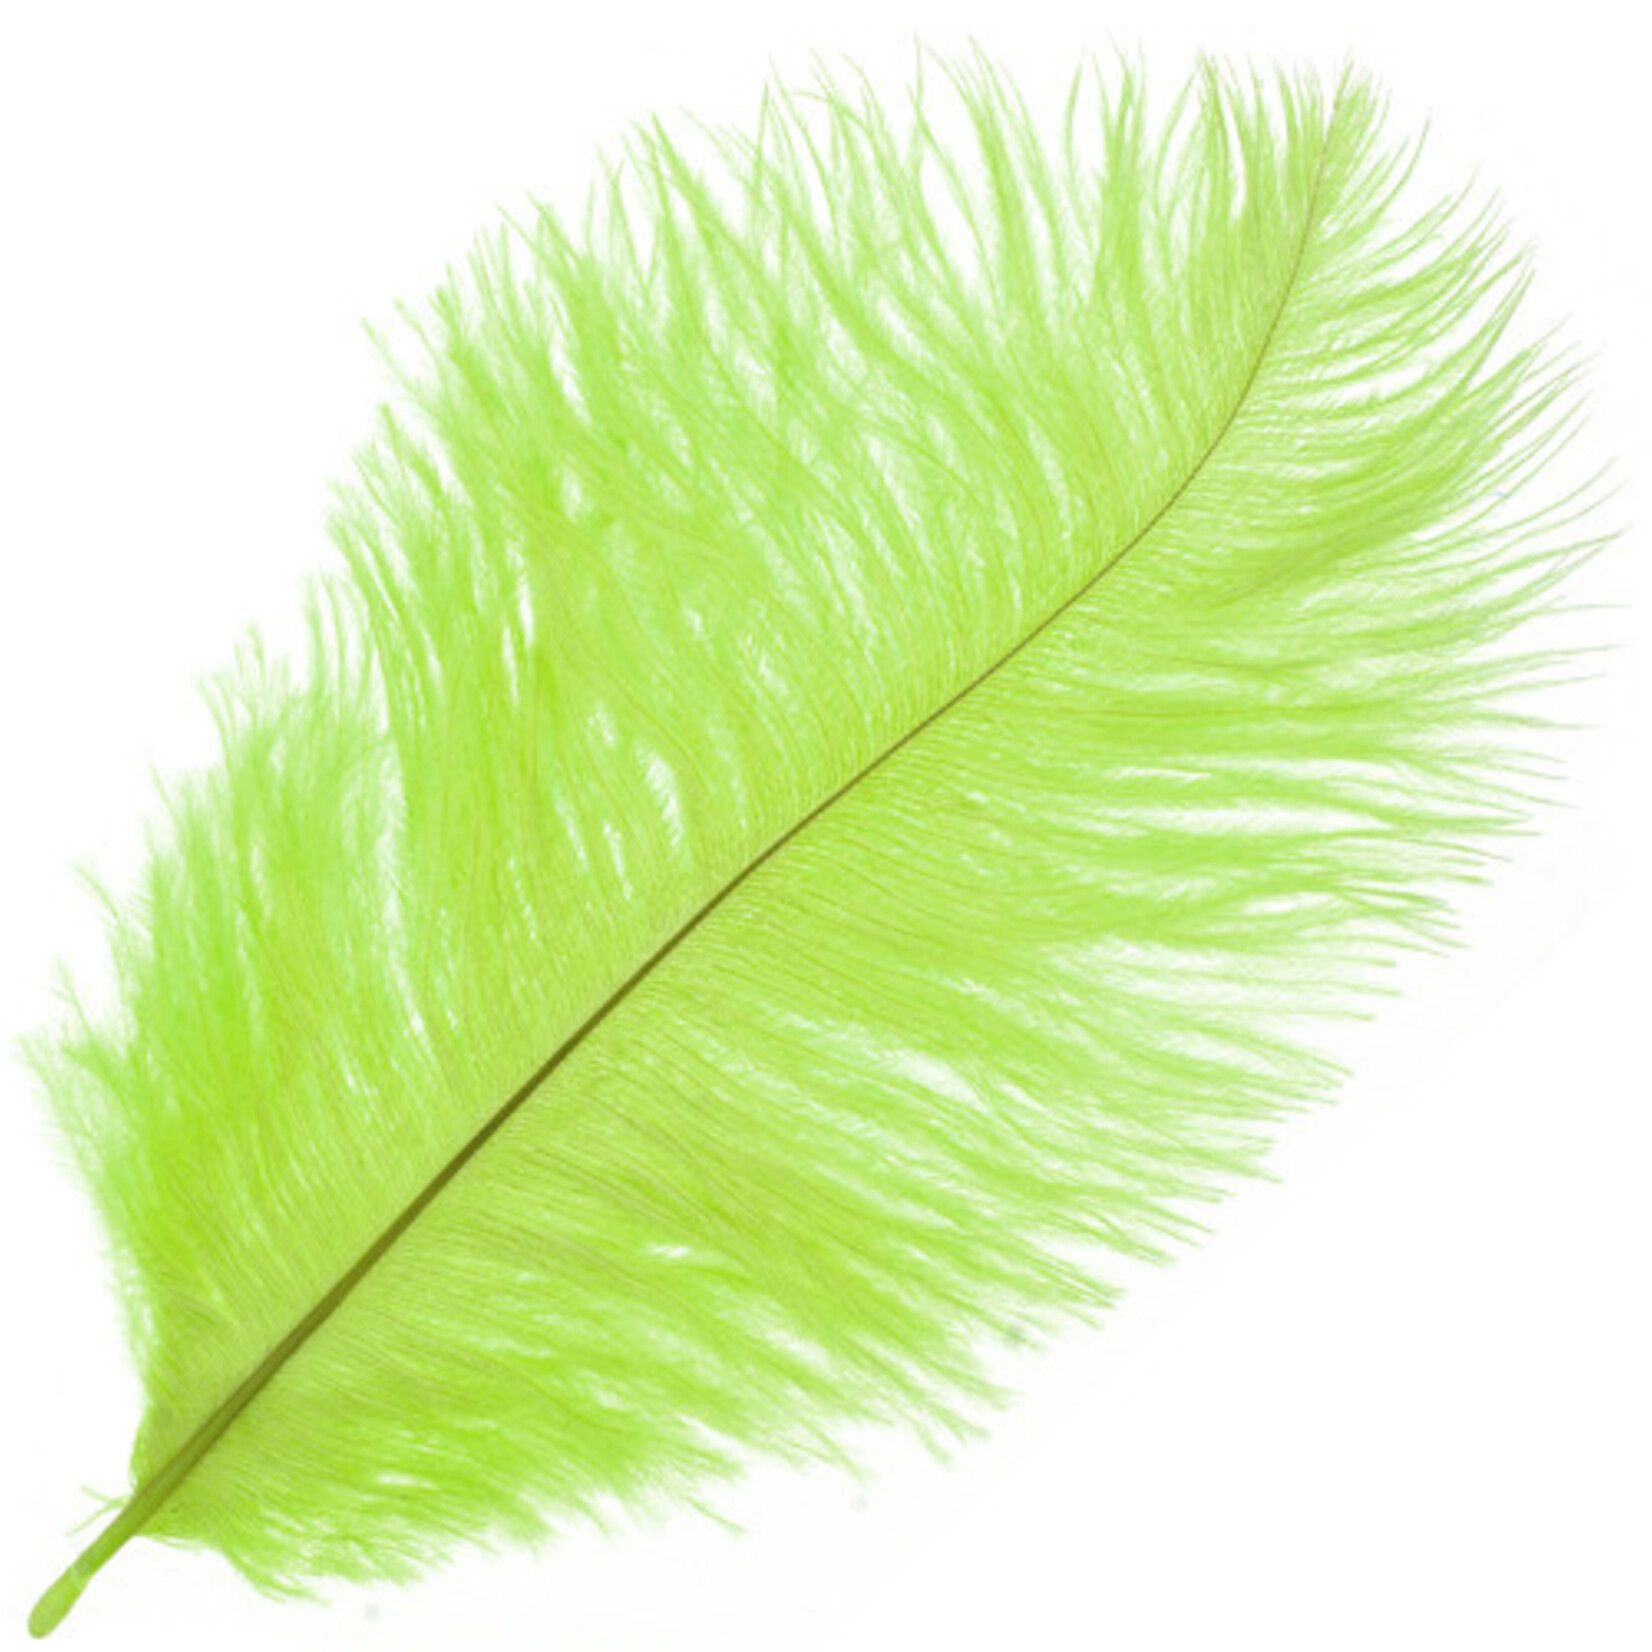 Ostrich Drab Plumes 6-8 Inch (12 pieces) Lime Green